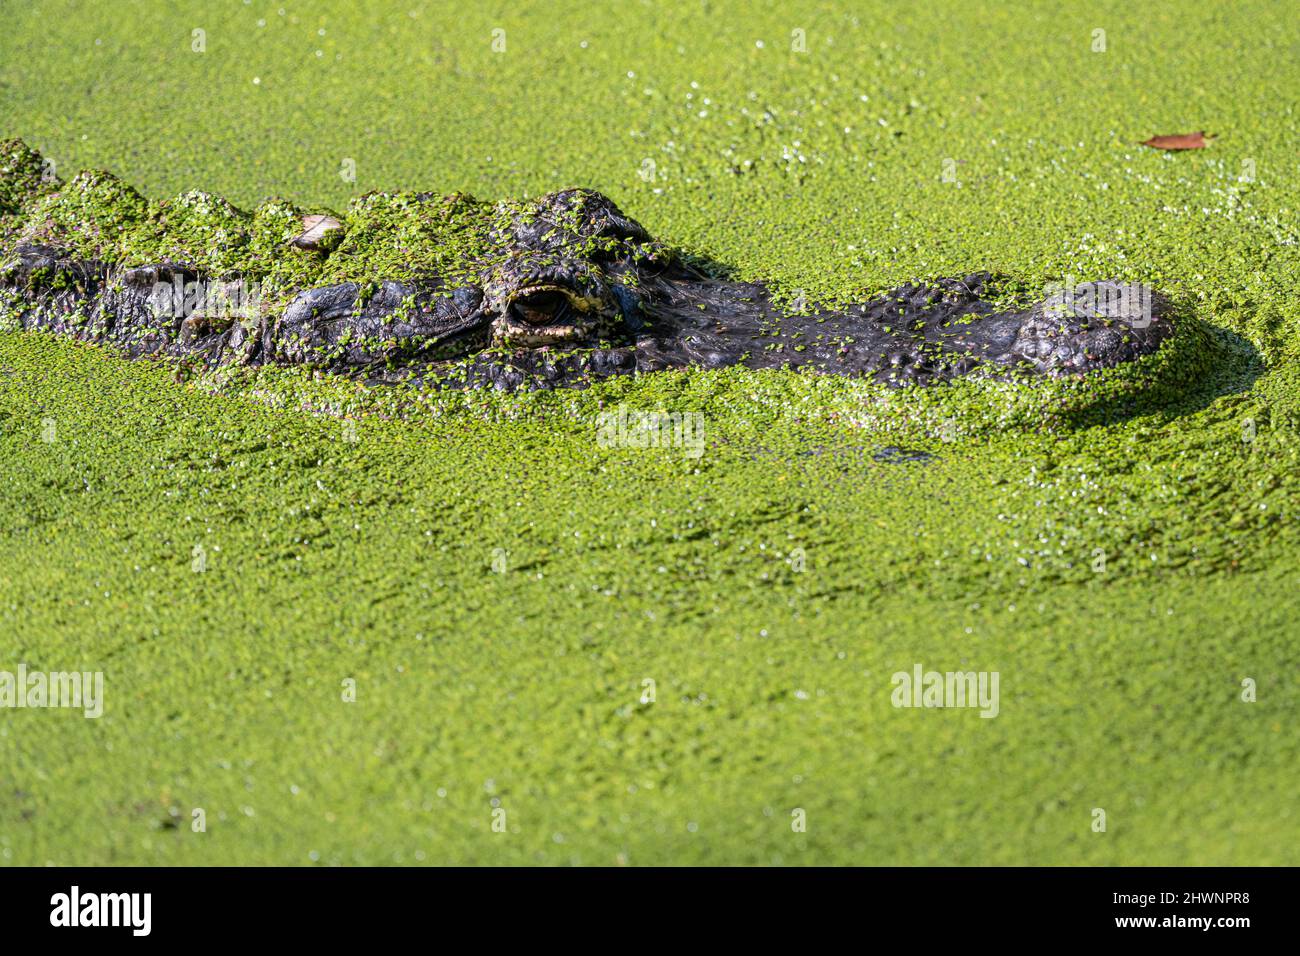 American alligator (Alligator mississippiensis) cruising along the surface of a duckweed covered pond at Jacksonville Zoo in Jacksonville, Florida. Stock Photo